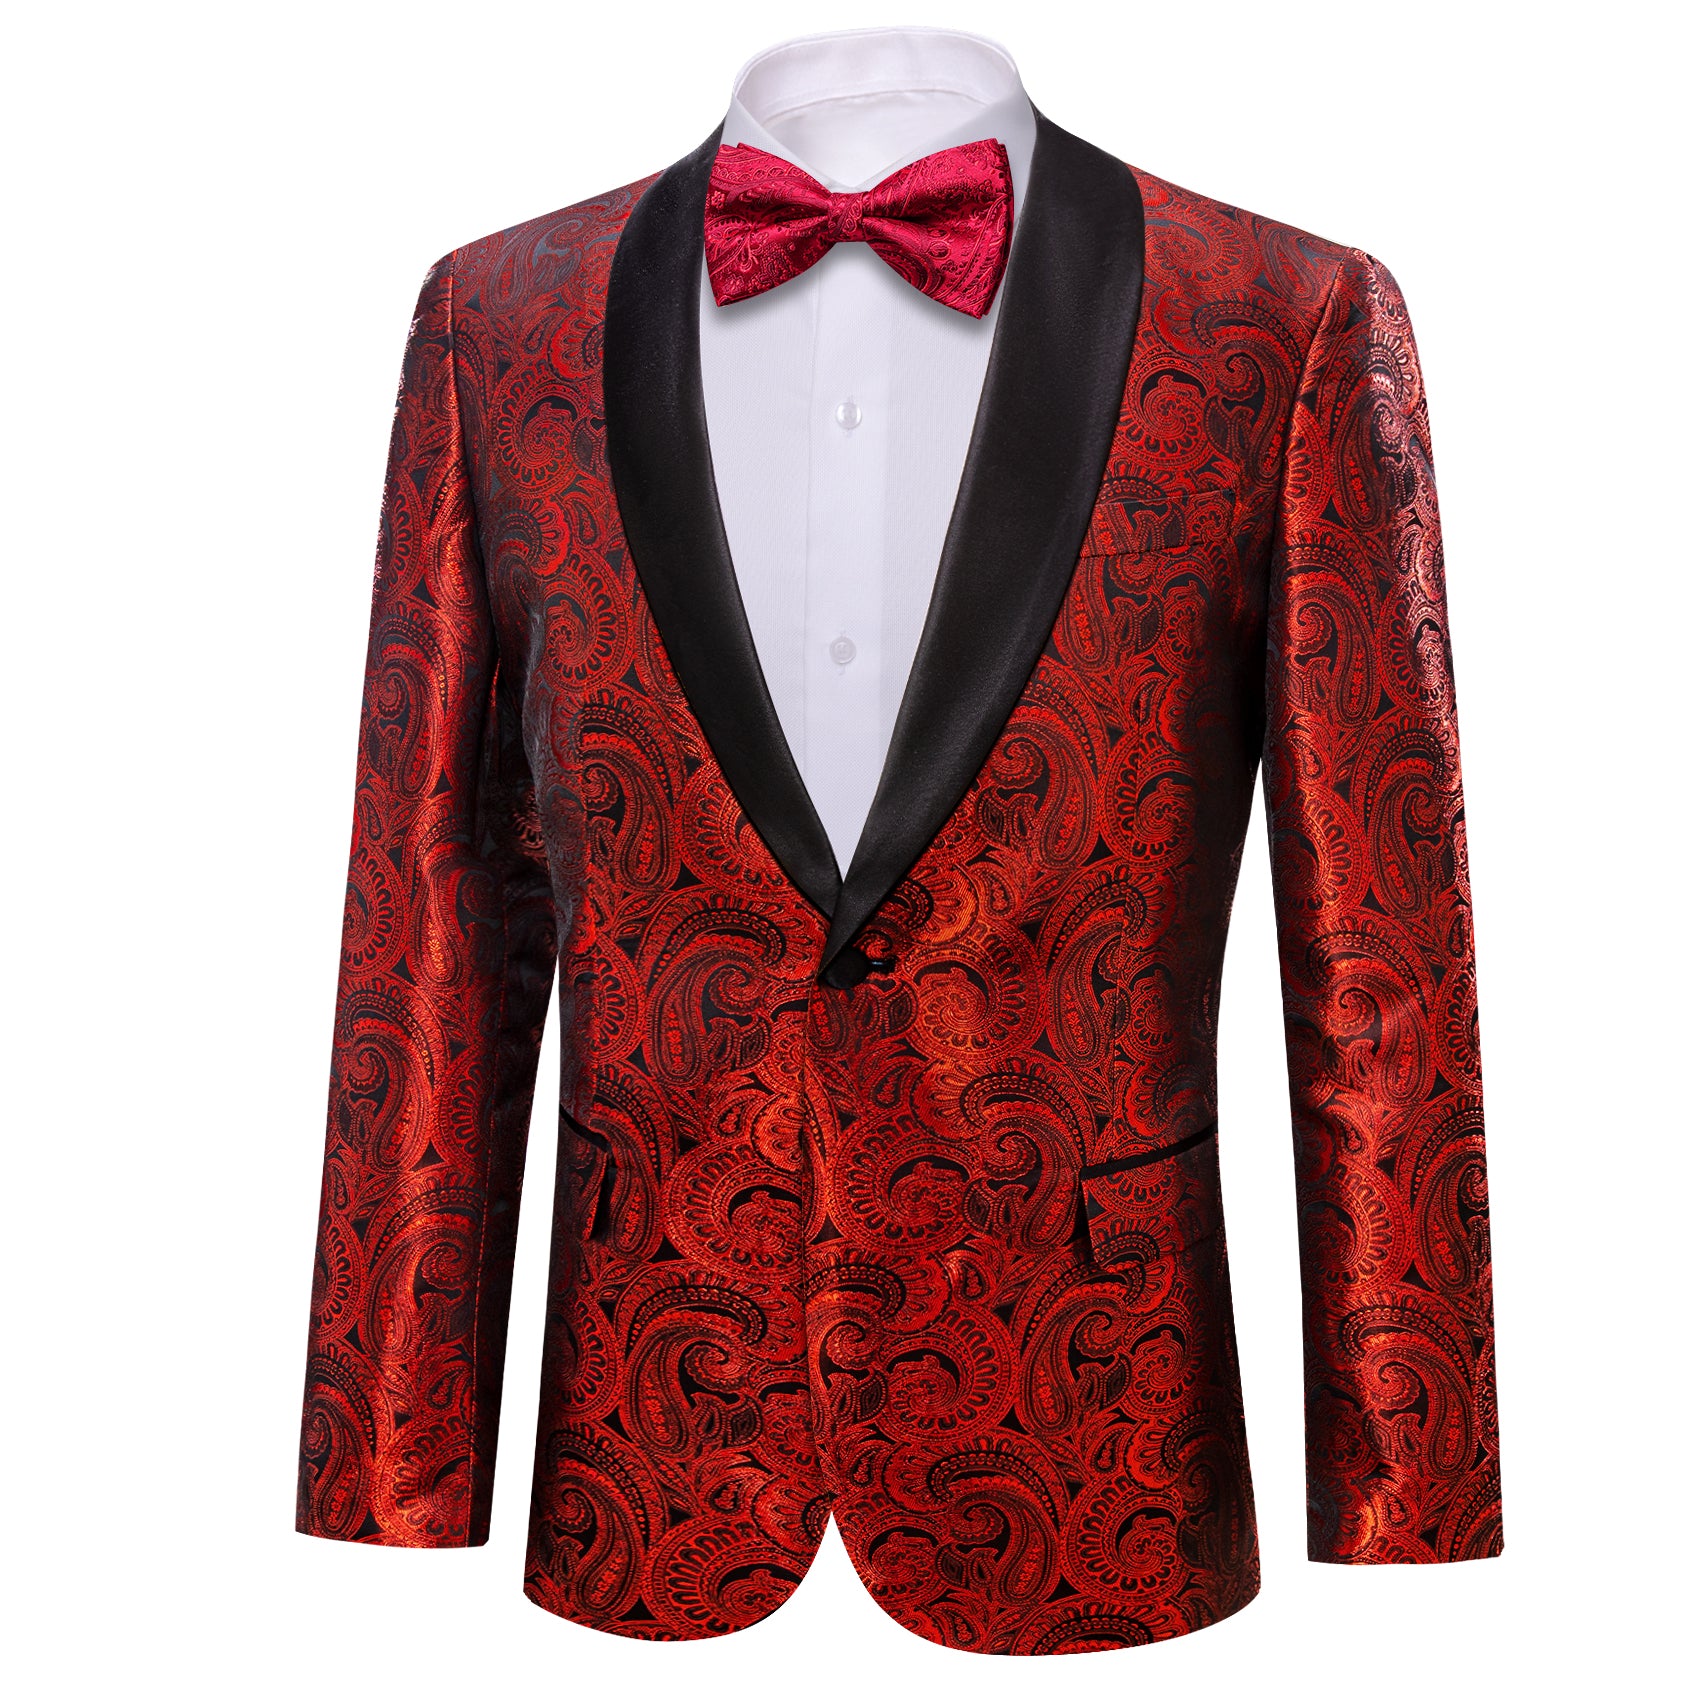 Barry.wang Men's Suit Red Jacquard Floral Silk Shawl Collar Suit Jacket